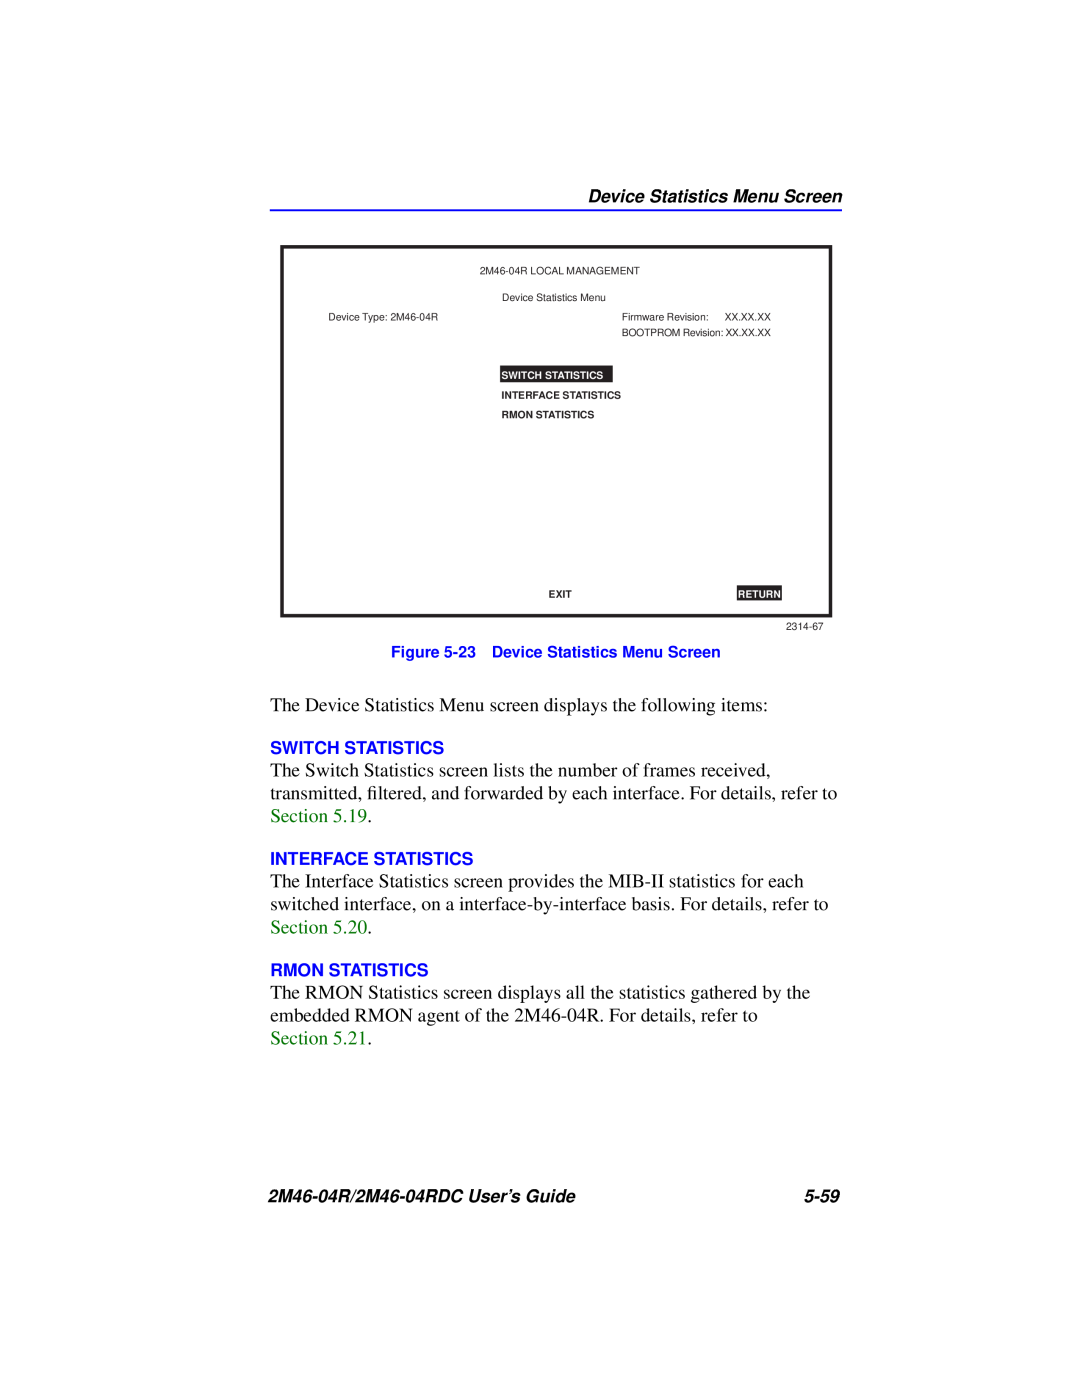 Cabletron Systems pmn manual The Device Statistics Menu screen displays the following items 